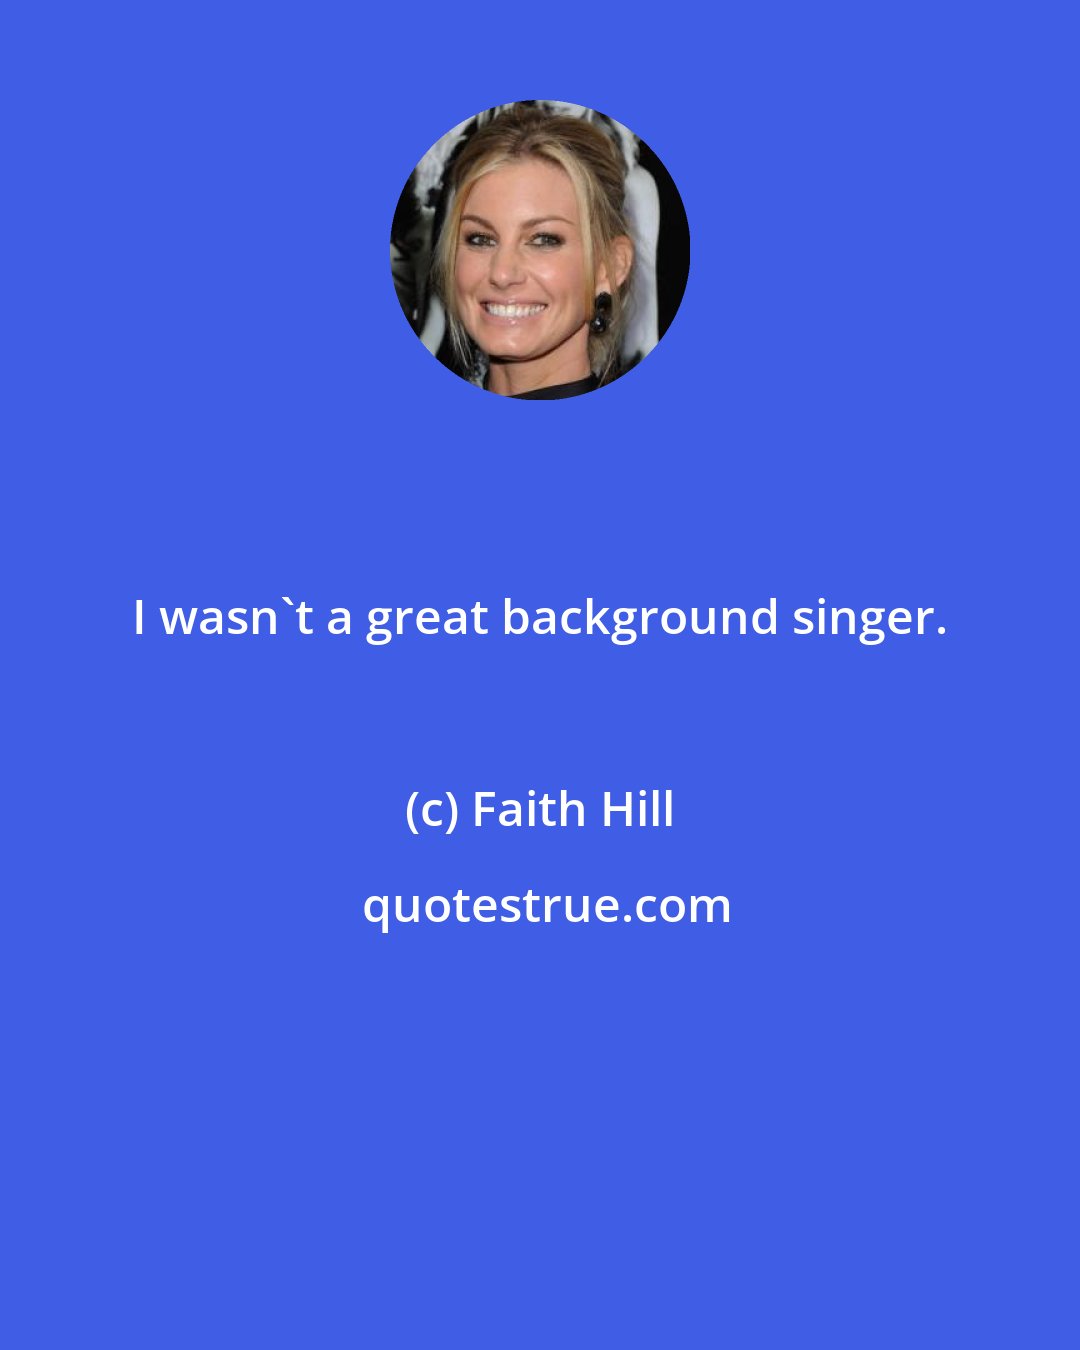 Faith Hill: I wasn't a great background singer.